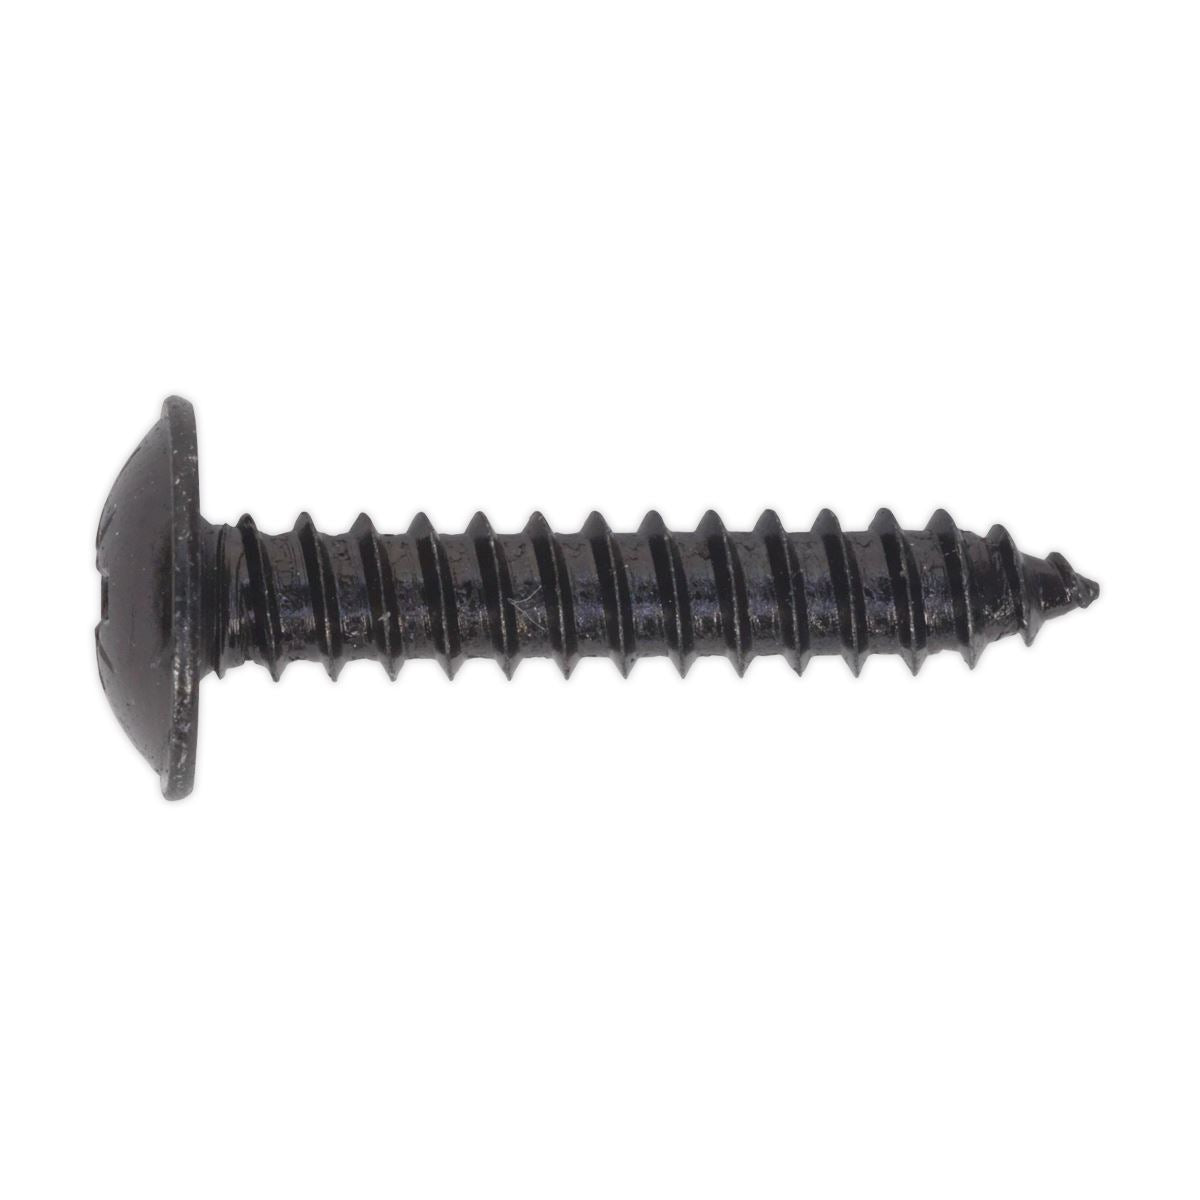 Sealey Self-Tapping Screw 4.8 x 25mm Flanged Head Black Pozi Pack of 100